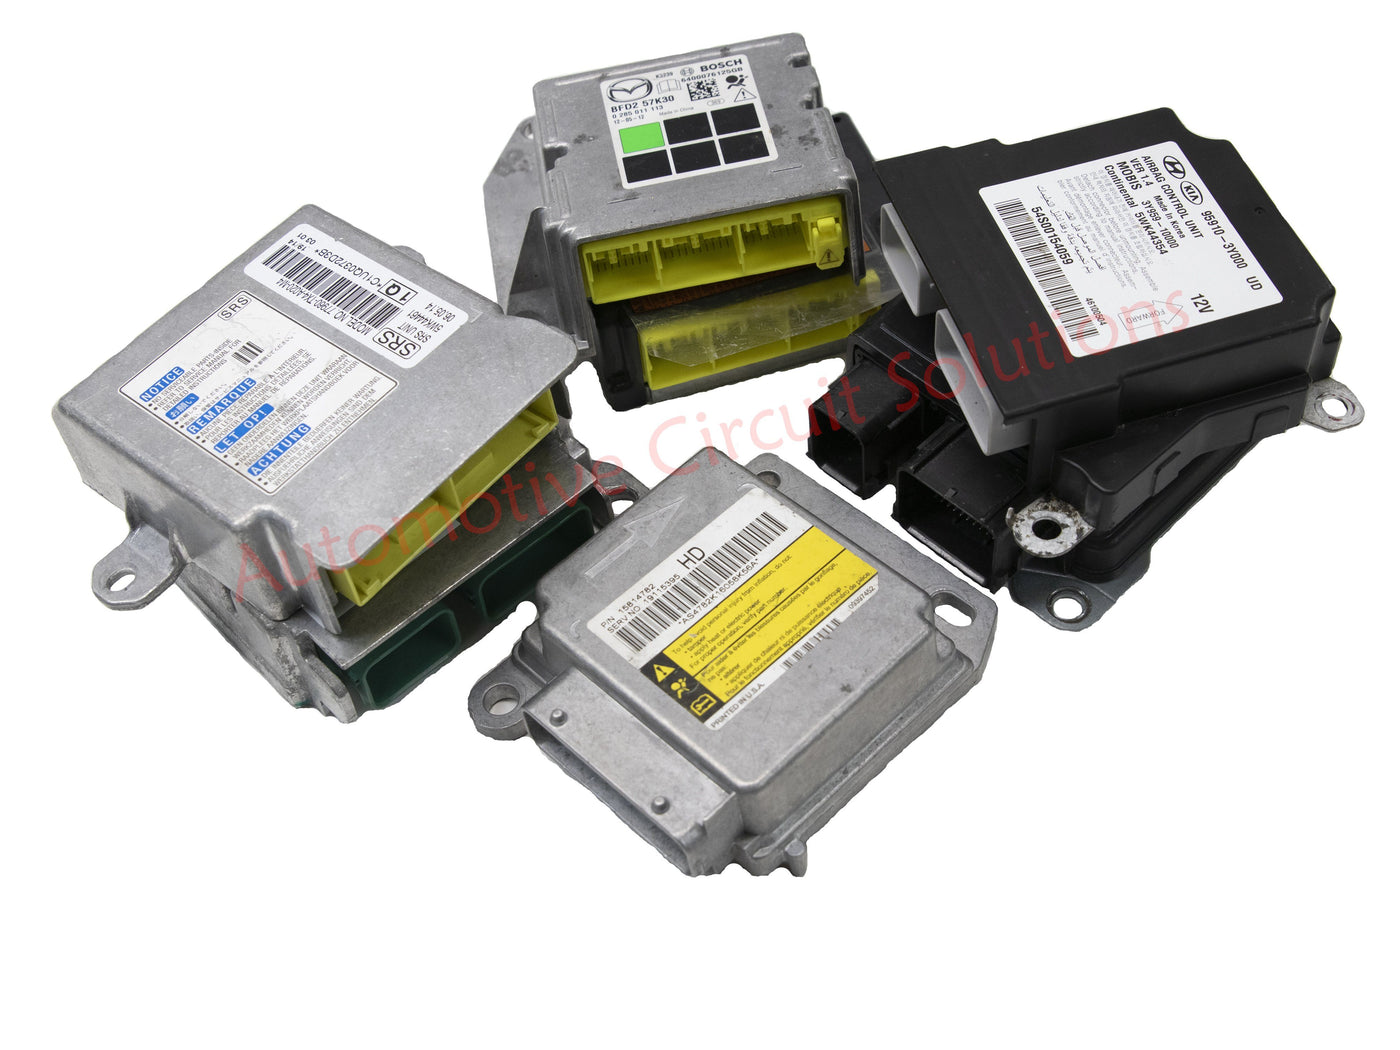 NISSAN SRS AIRBAG CONTROL MODULE REPAIR RESET SERVICE (24H Turn Around) SRS Module Reset Automotive Circuit Solutions 